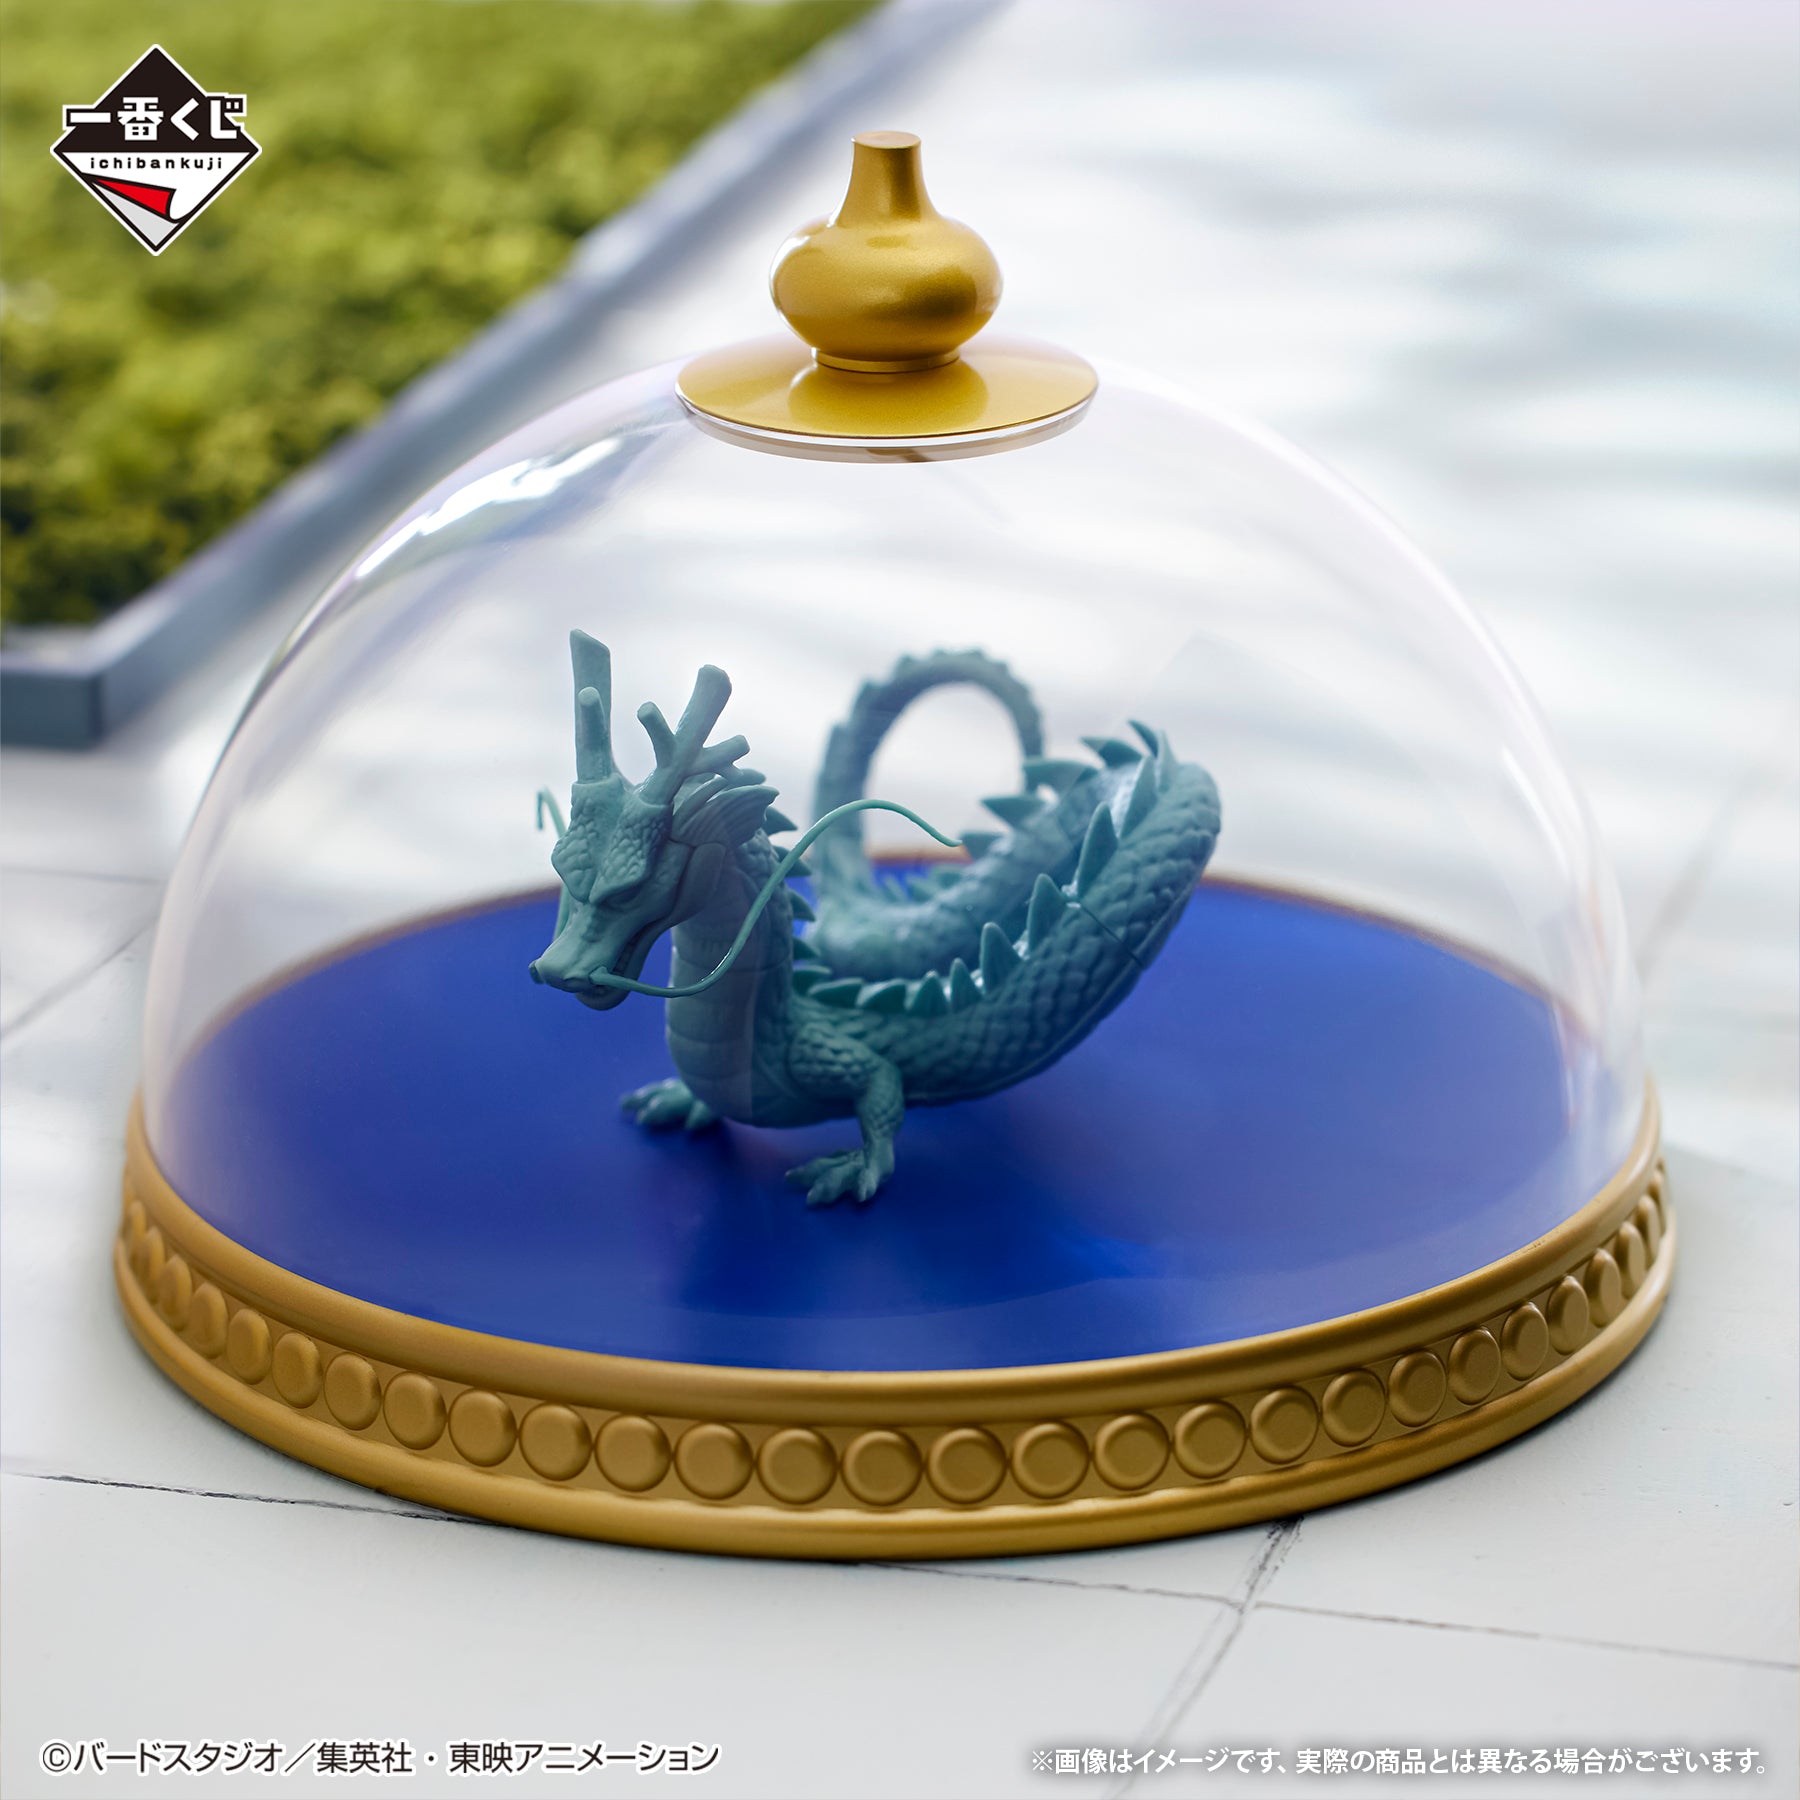 DRAGON BALL ICHIBAN KUJI - Dragon Ball EX Temple Above the Clouds - D PRIZE - Shenron model figure MASTERELIVE COLLECTION